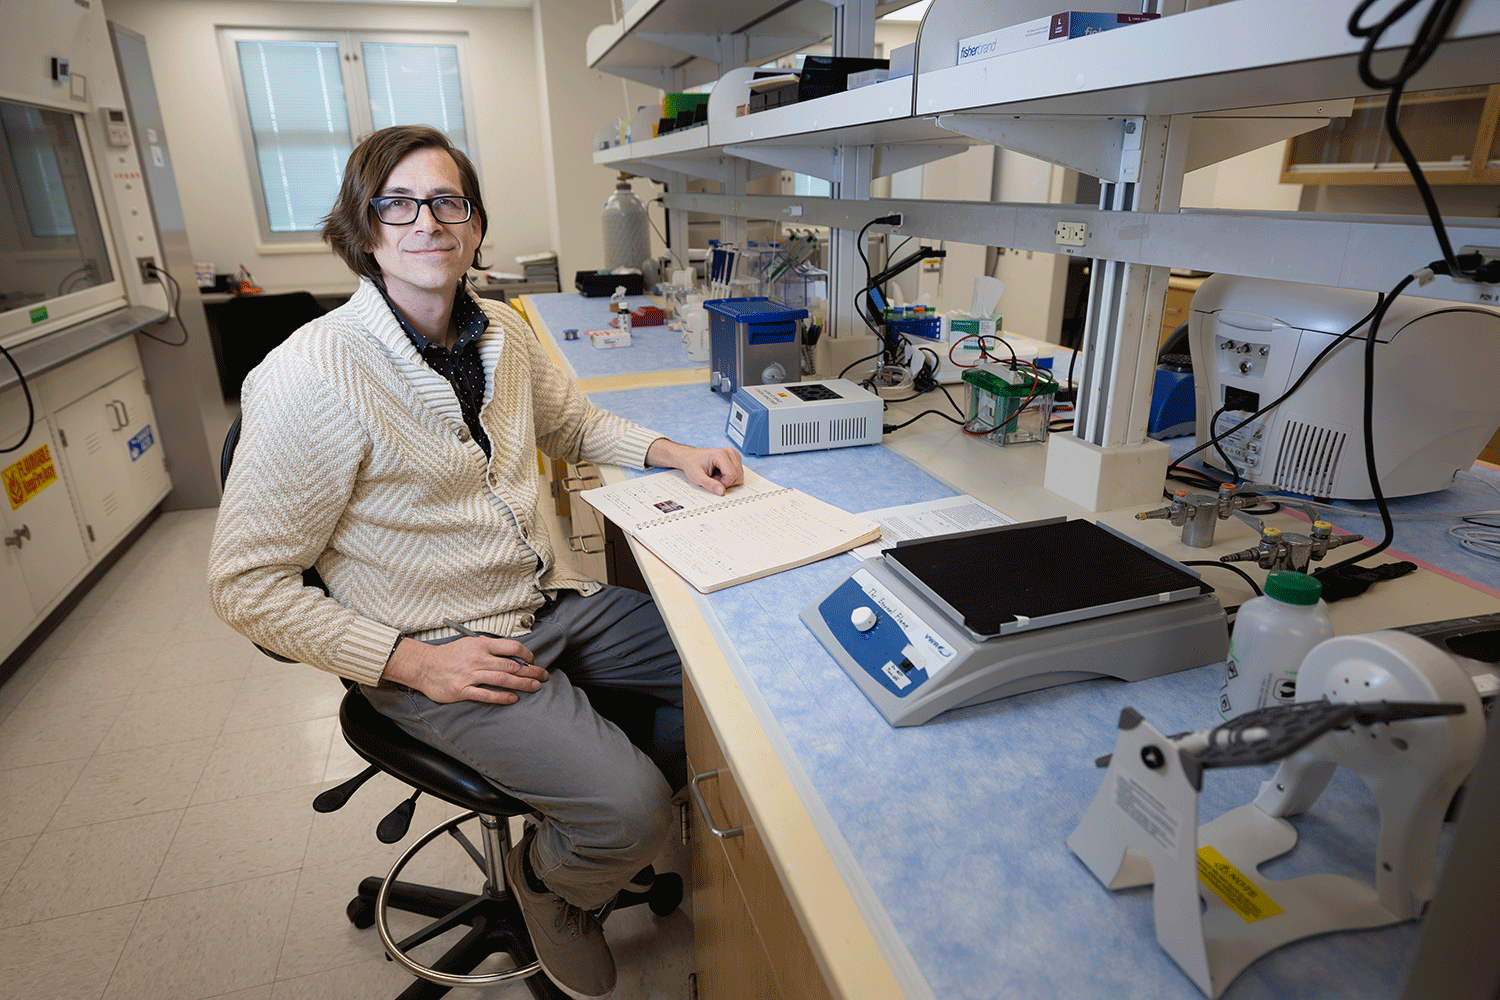 Caucasian male seated at counter in scientific laboratory surrounding by equipment